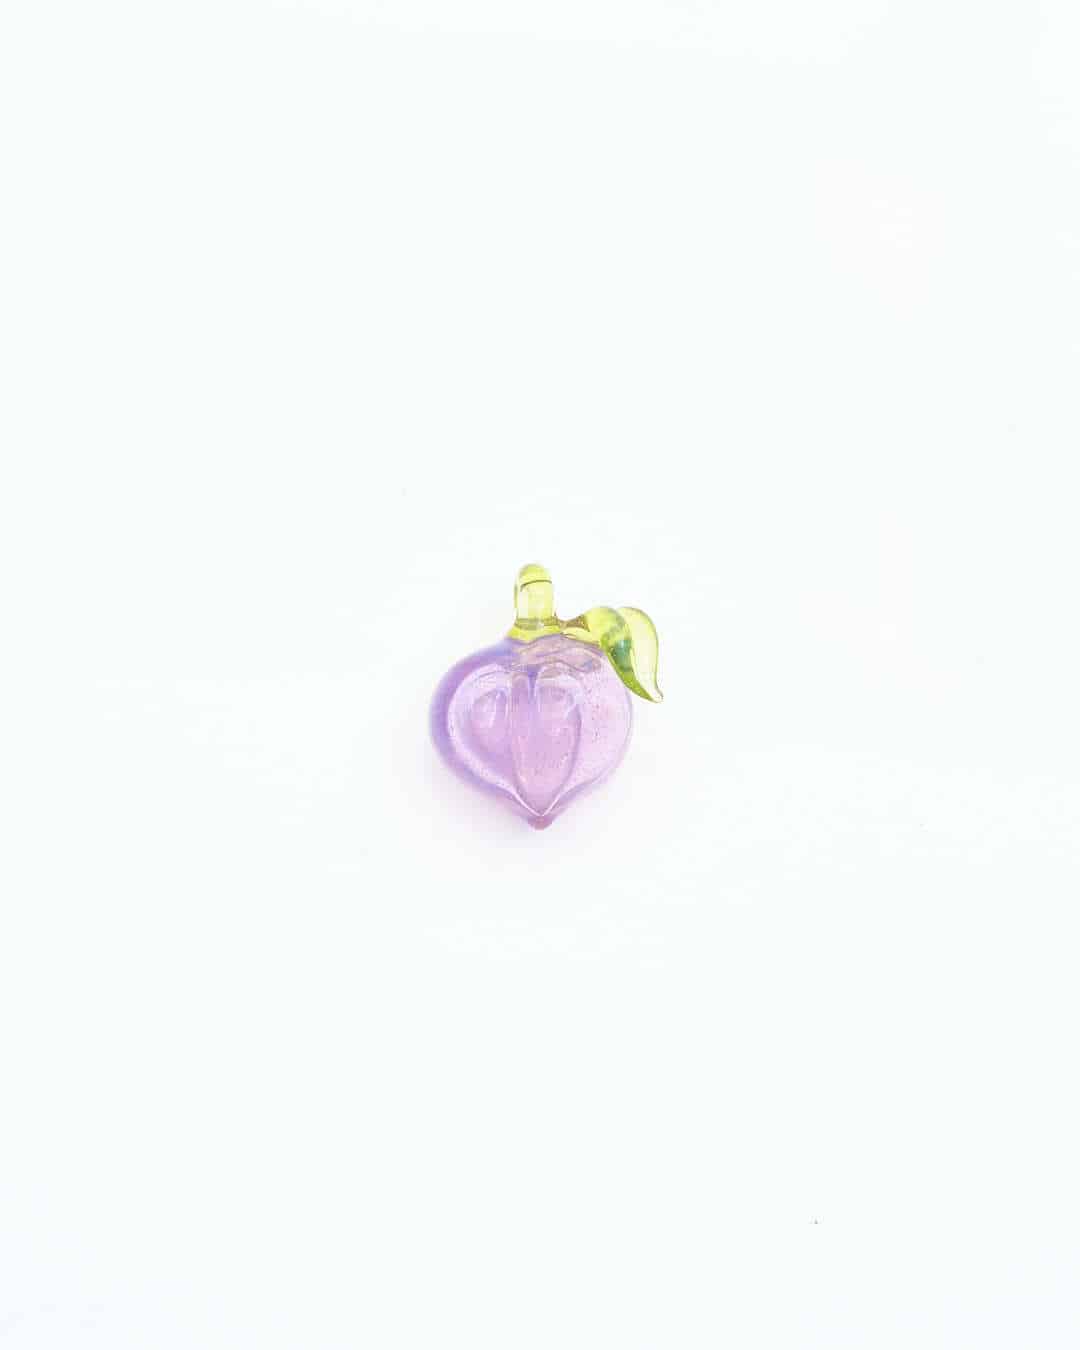 meticulously crafted glass pendant - (26C) Purple Peach w/ Light Green Stem Pendant by Gnarla Carla